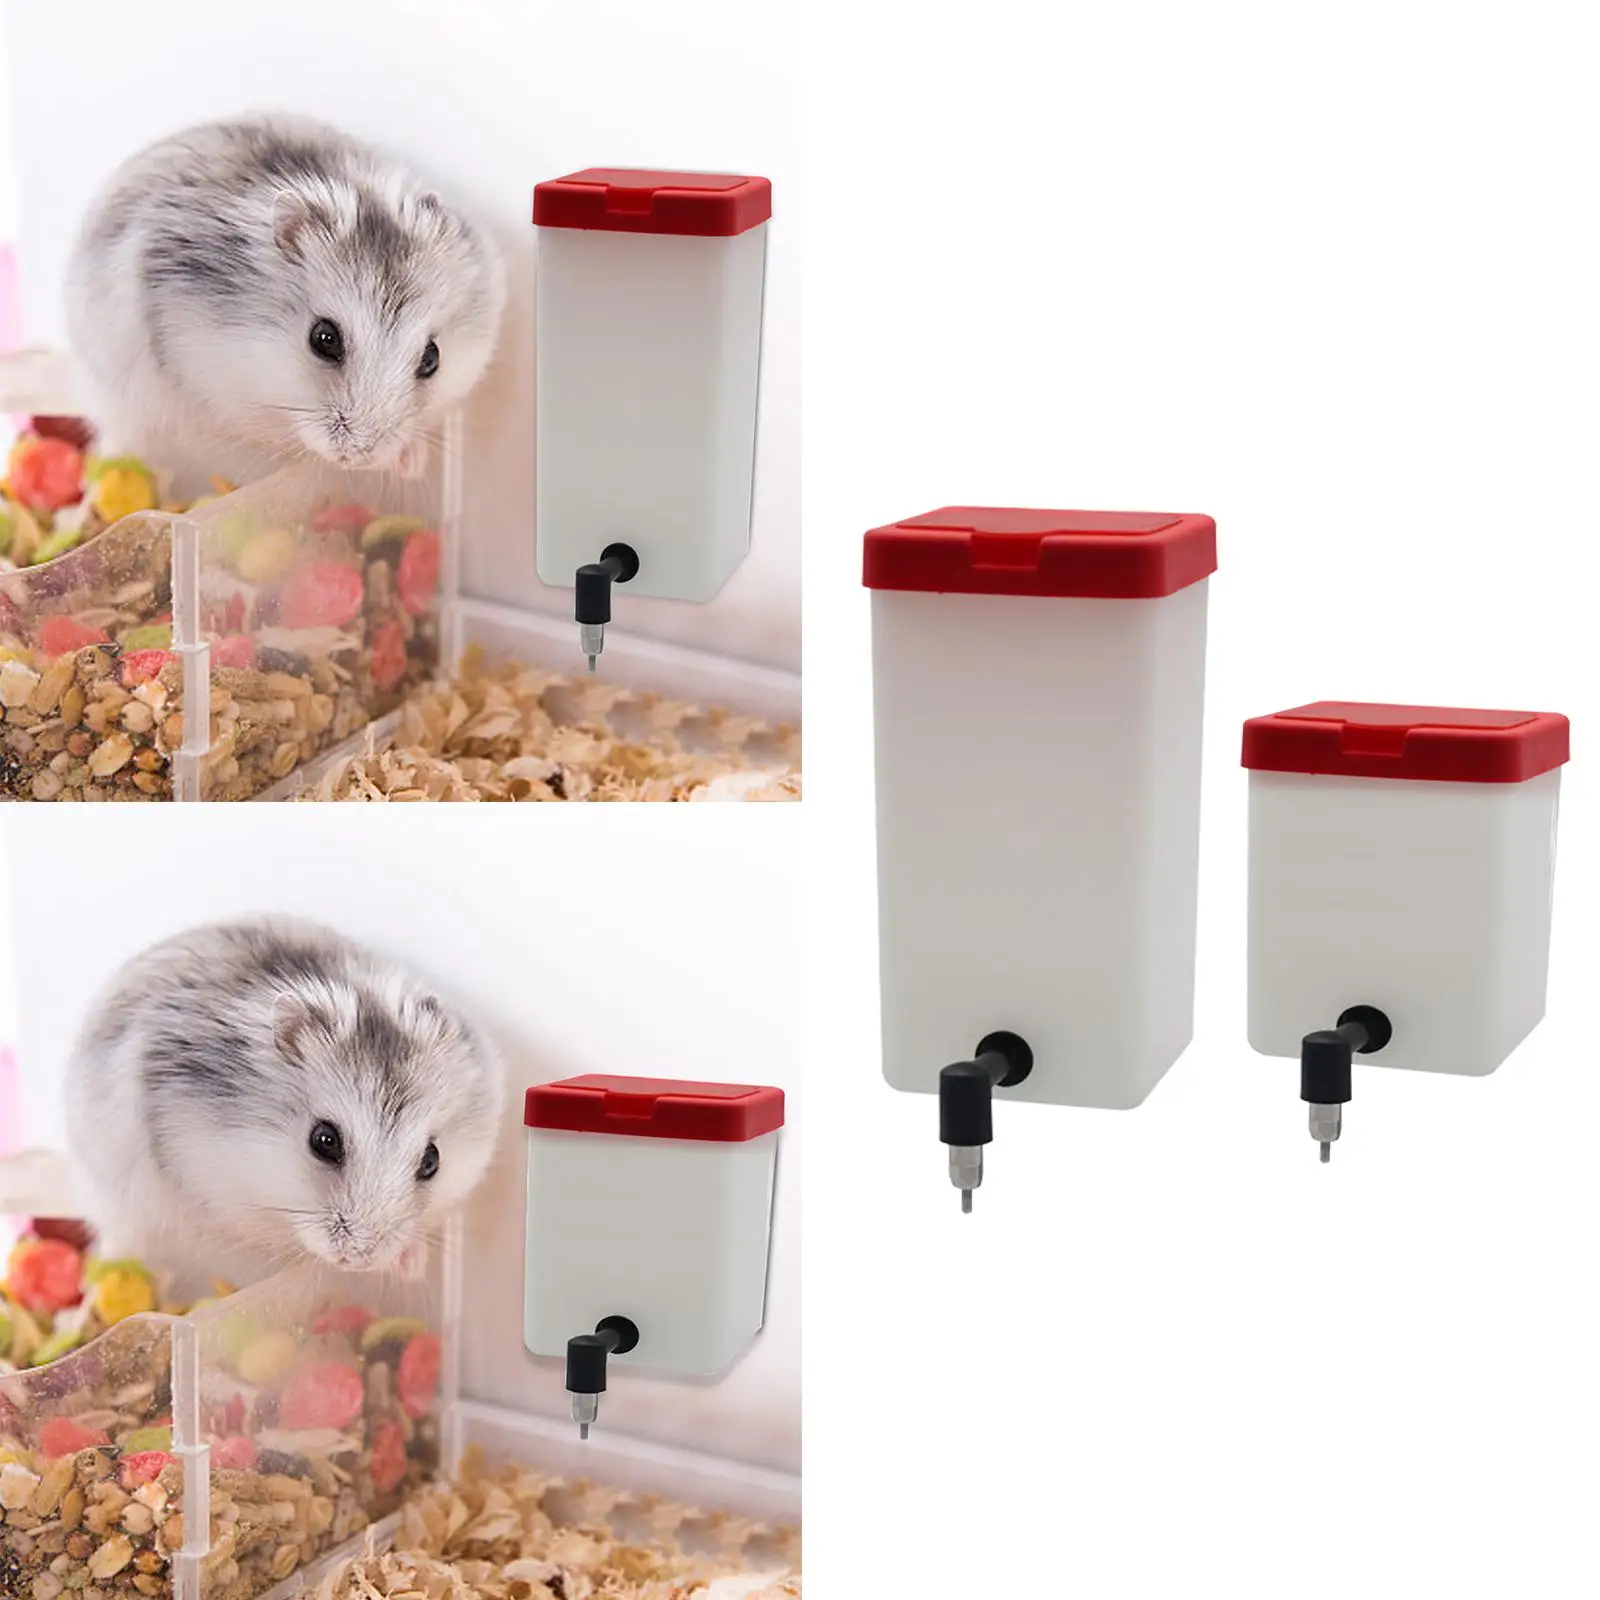 Portable Automatic Drinker Dispenser Drinking Bowl Water Feeder No Drip for Rabbit Small Animal Guinea Chicken Ferret